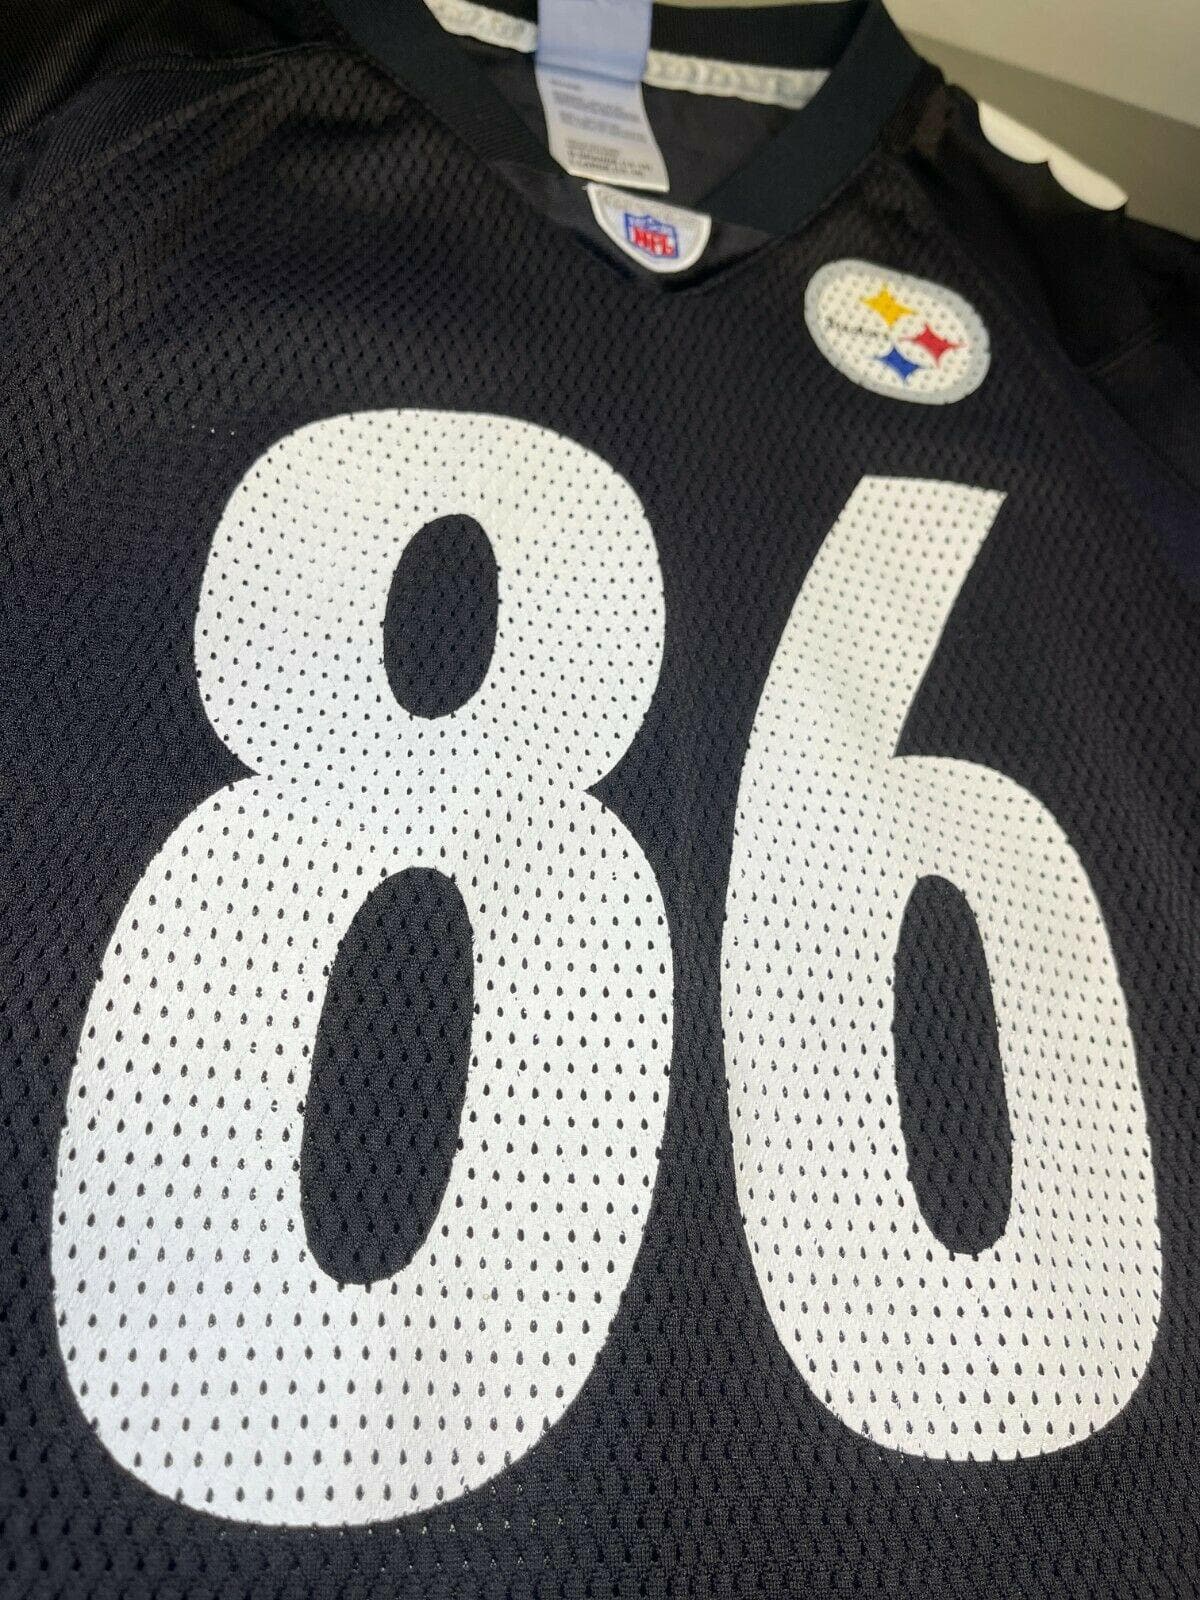 NFL Pittsburgh Steelers Hines Ward #86 Reebok Jersey Youth Large 14-16 38"